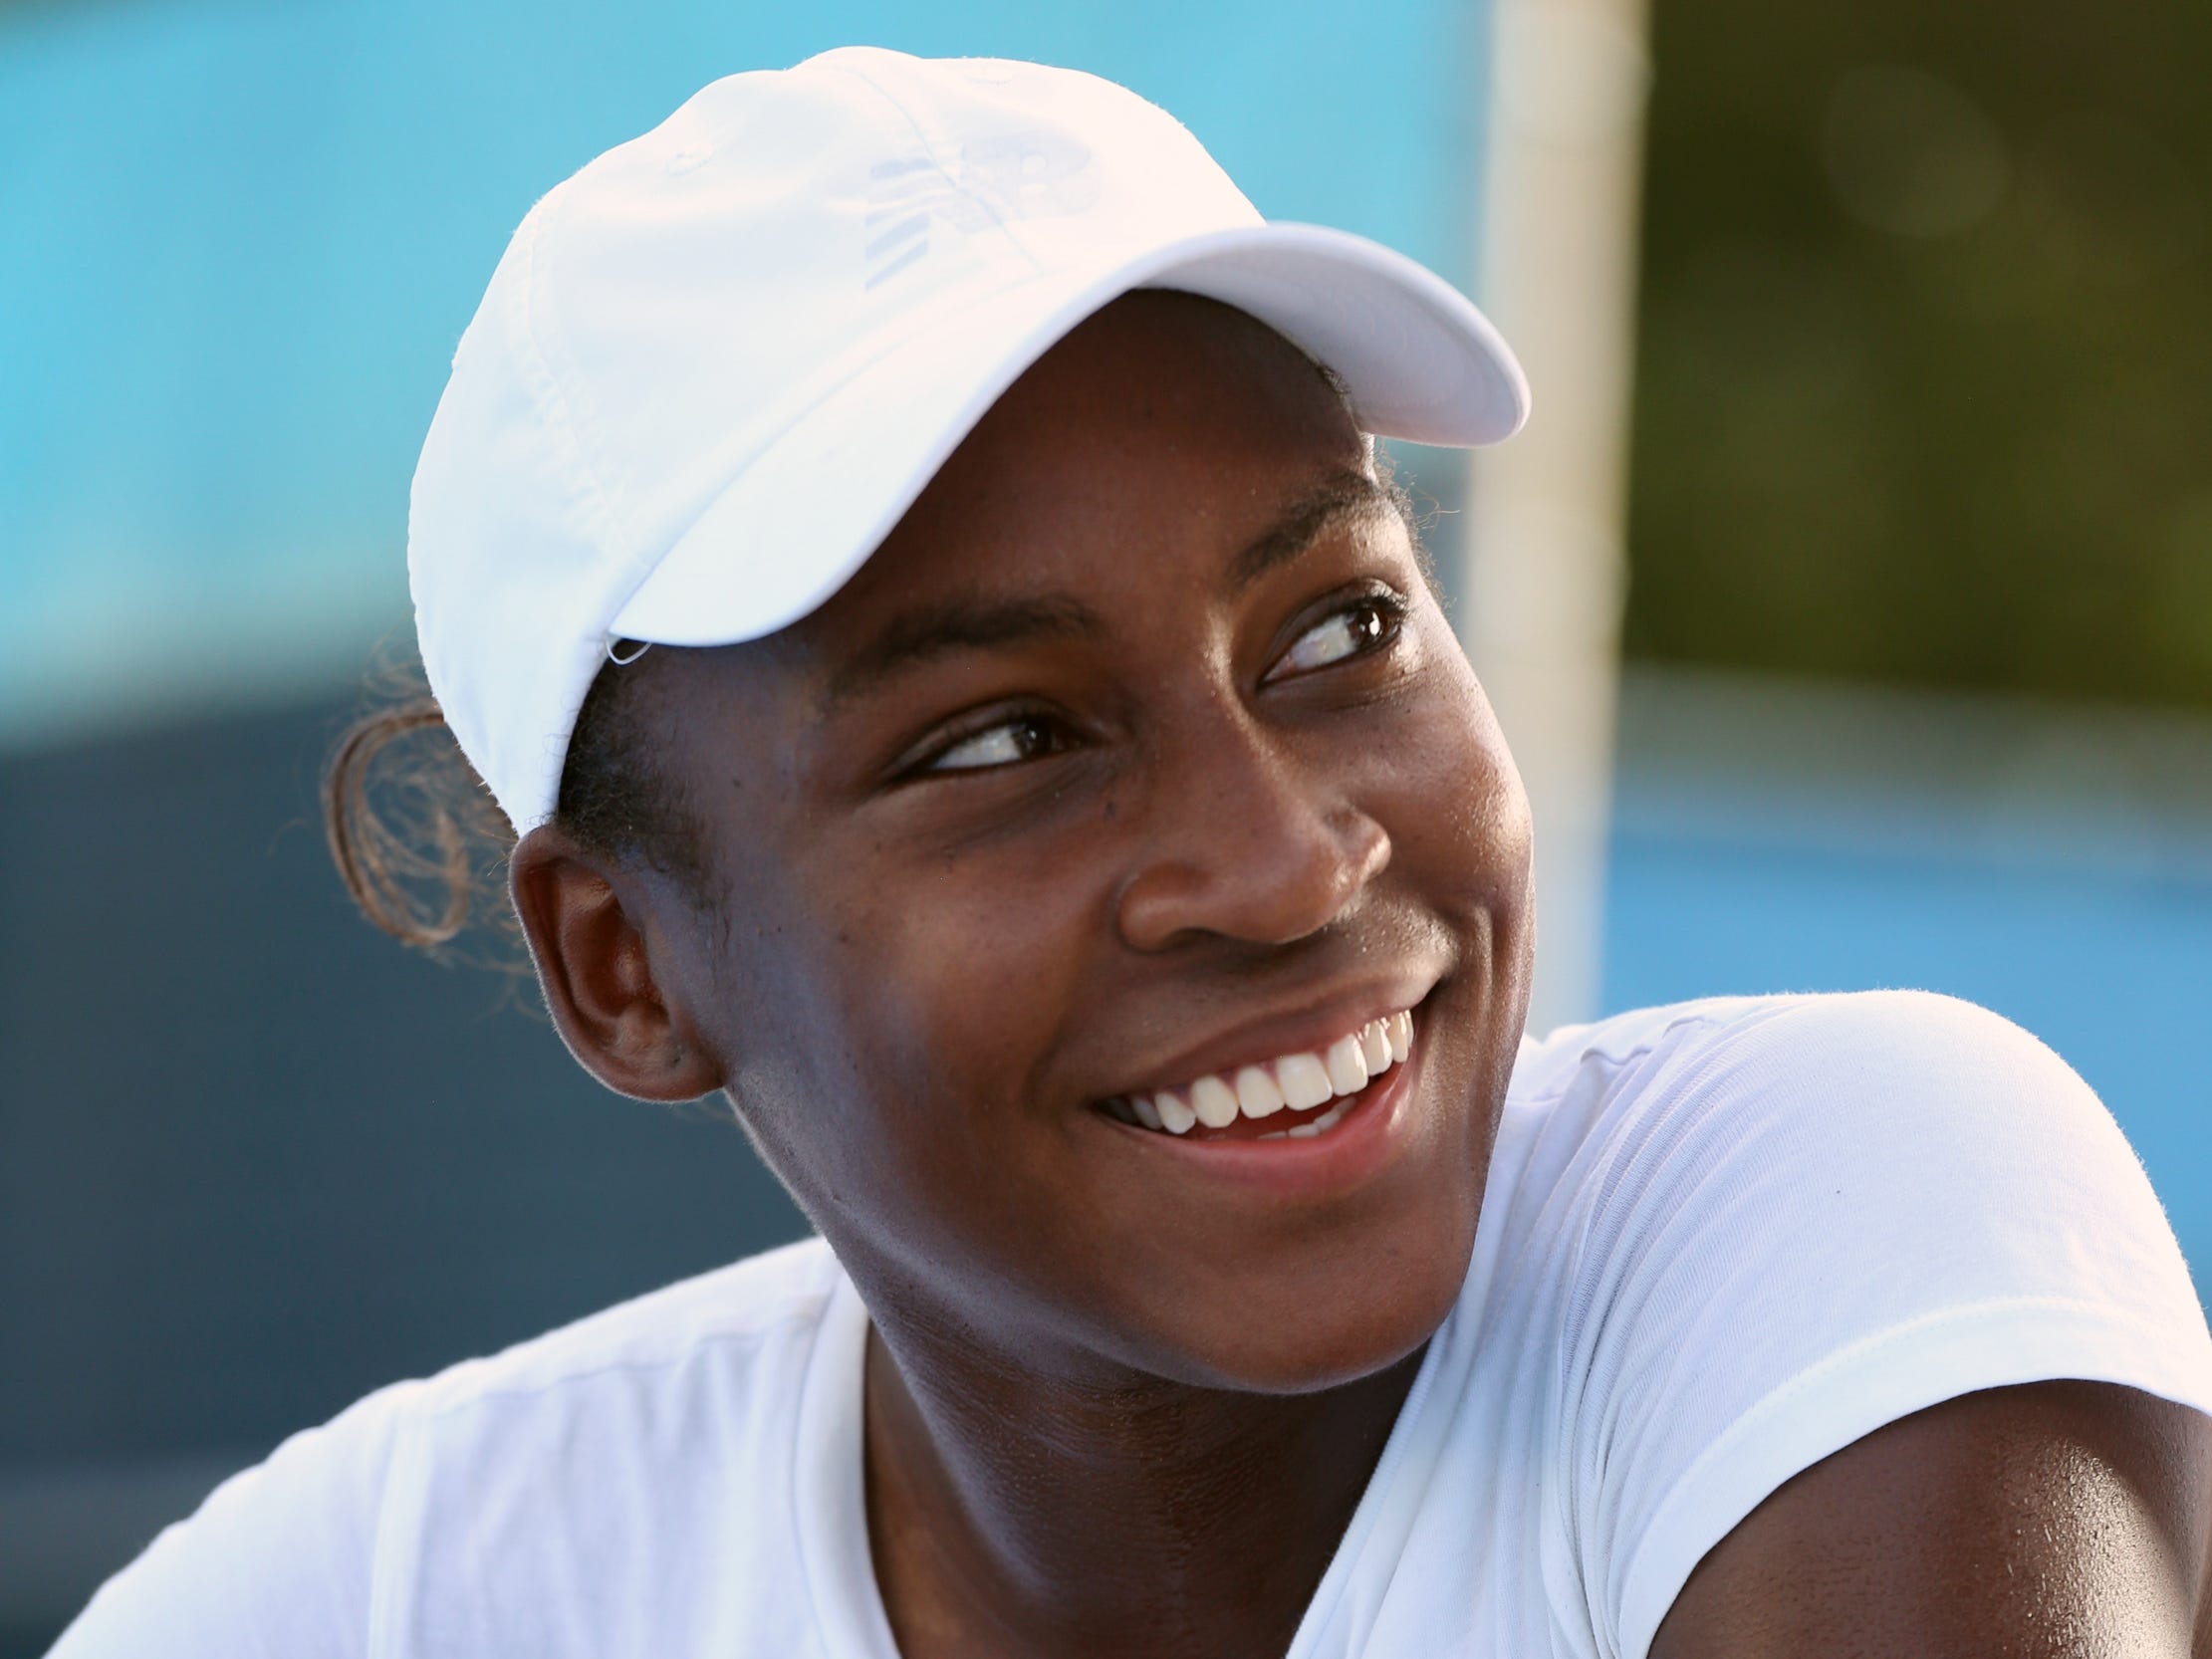 Coco Gauff works out and films a commercial for HEAD at the Delray Beach Tennis Center.